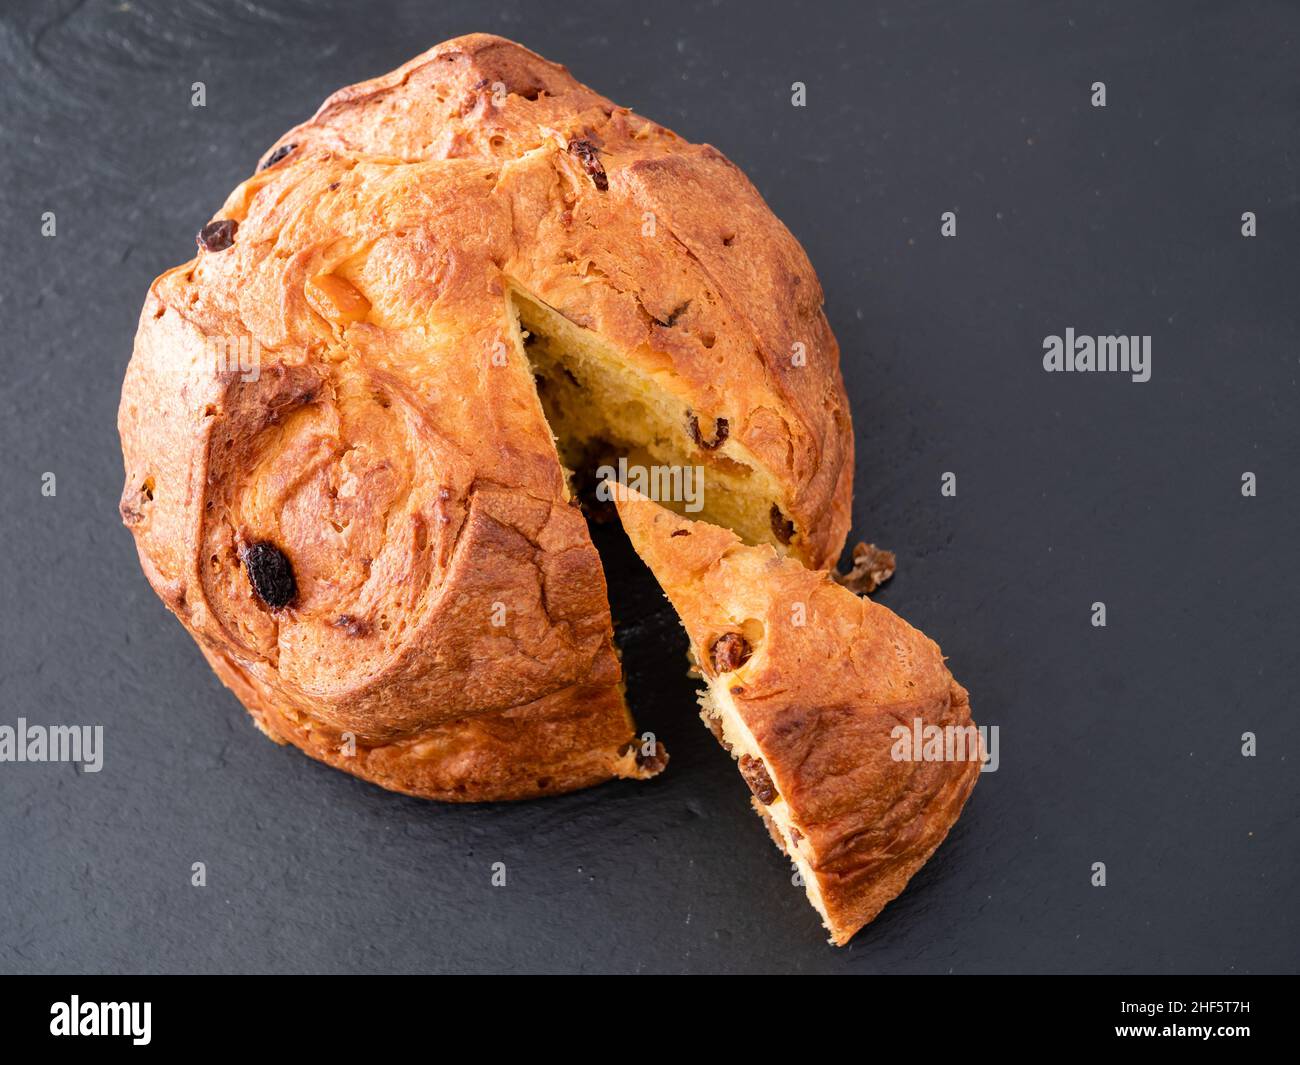 Panettone Italian Sponge Cake or Sweet Bread Slice from Milan, Served Traditionally for Christmas Stock Photo